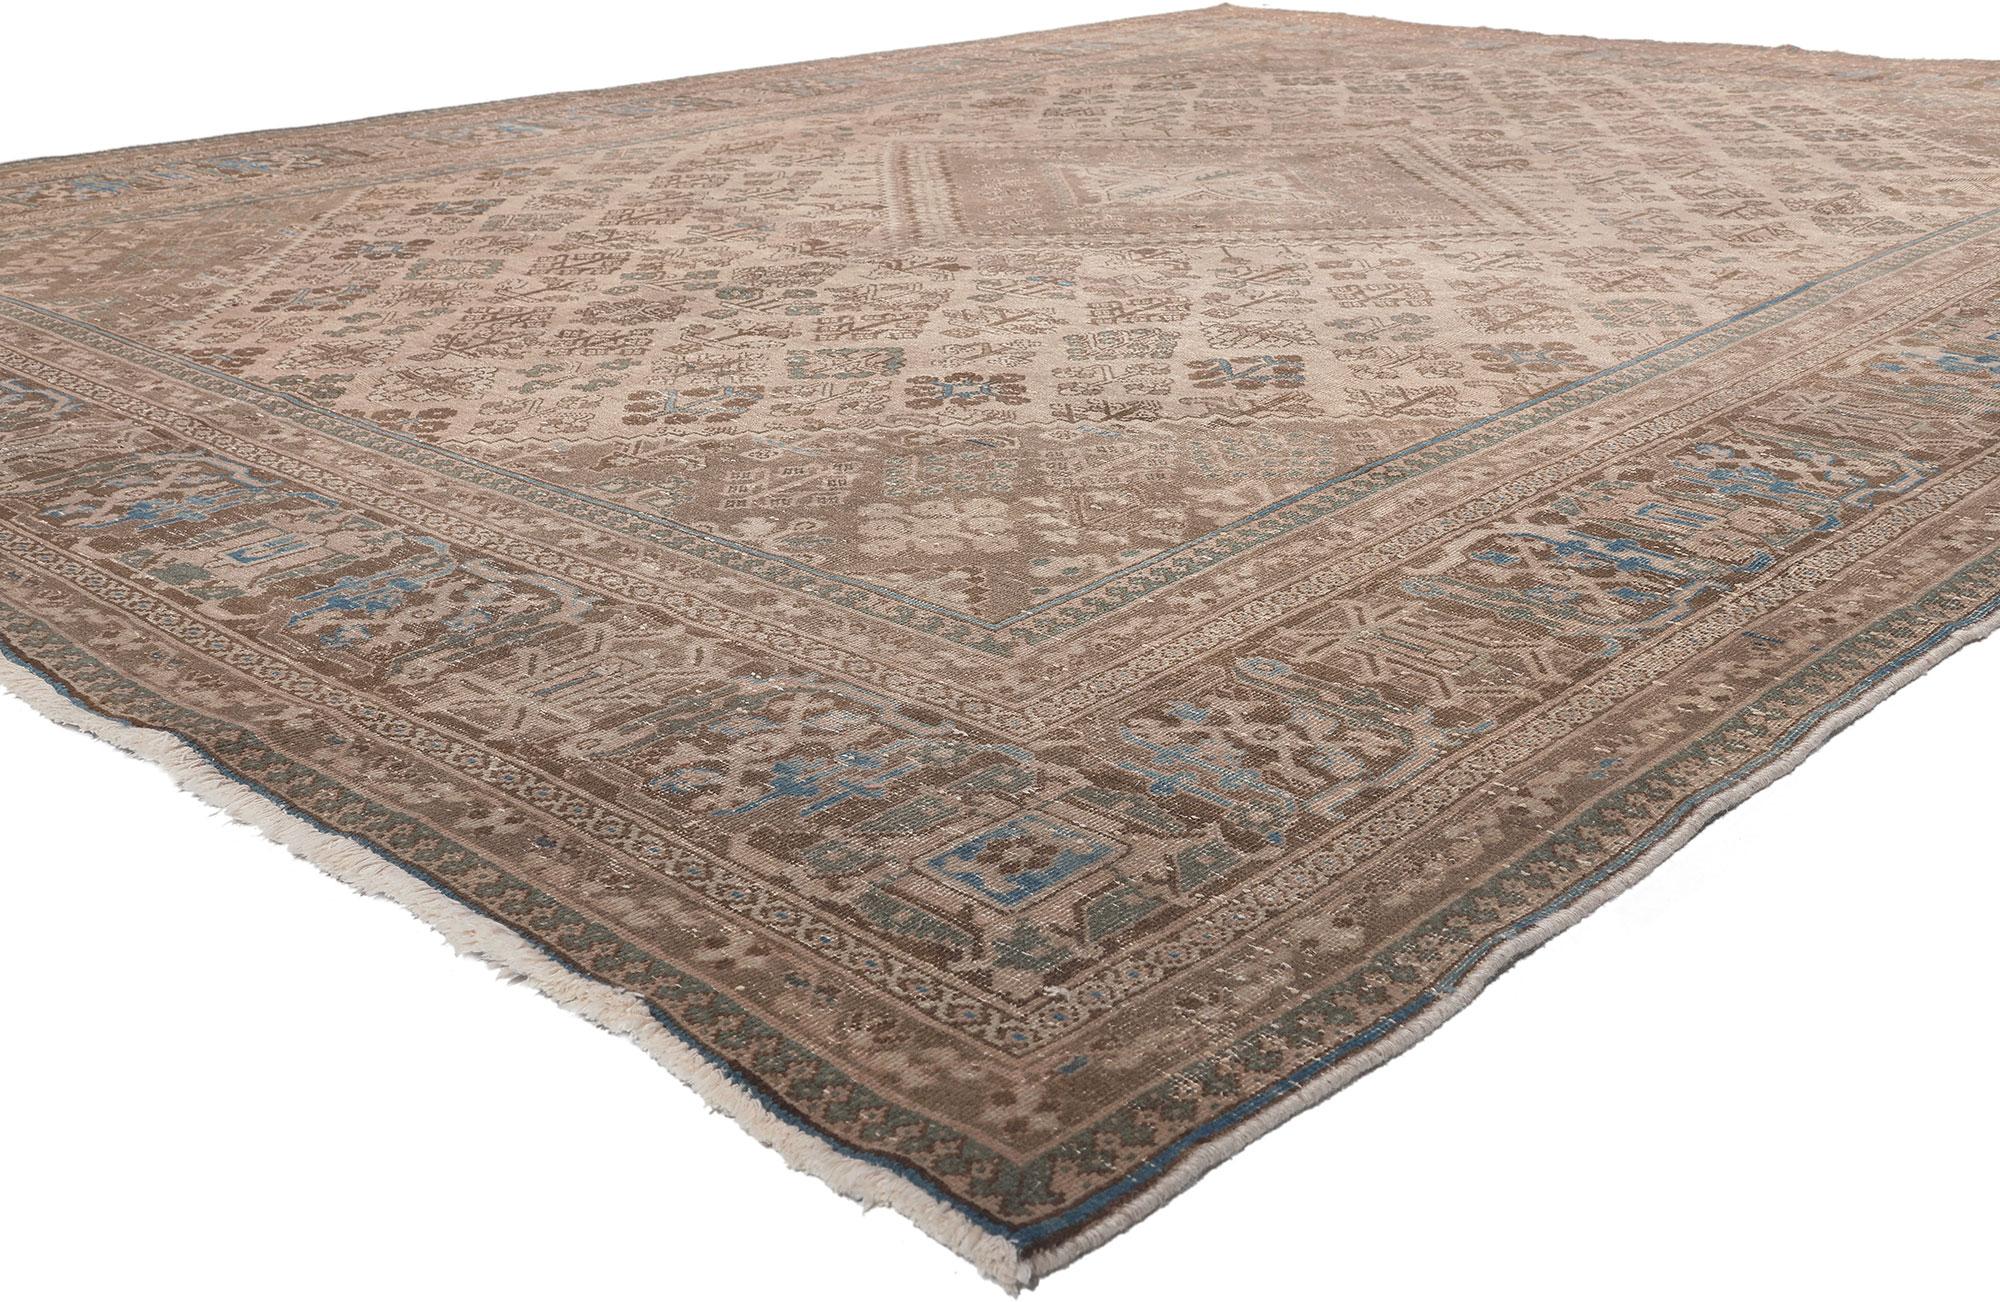 78597 Distressed Antique Persian Joshegan Rug, 10'00 x 13'06. 
Traditional sensibility meets effortlessly chic in this distressed vintage Persian Joshegan rug. The intricate botanical design and muted earthy hues woven into this piece work together